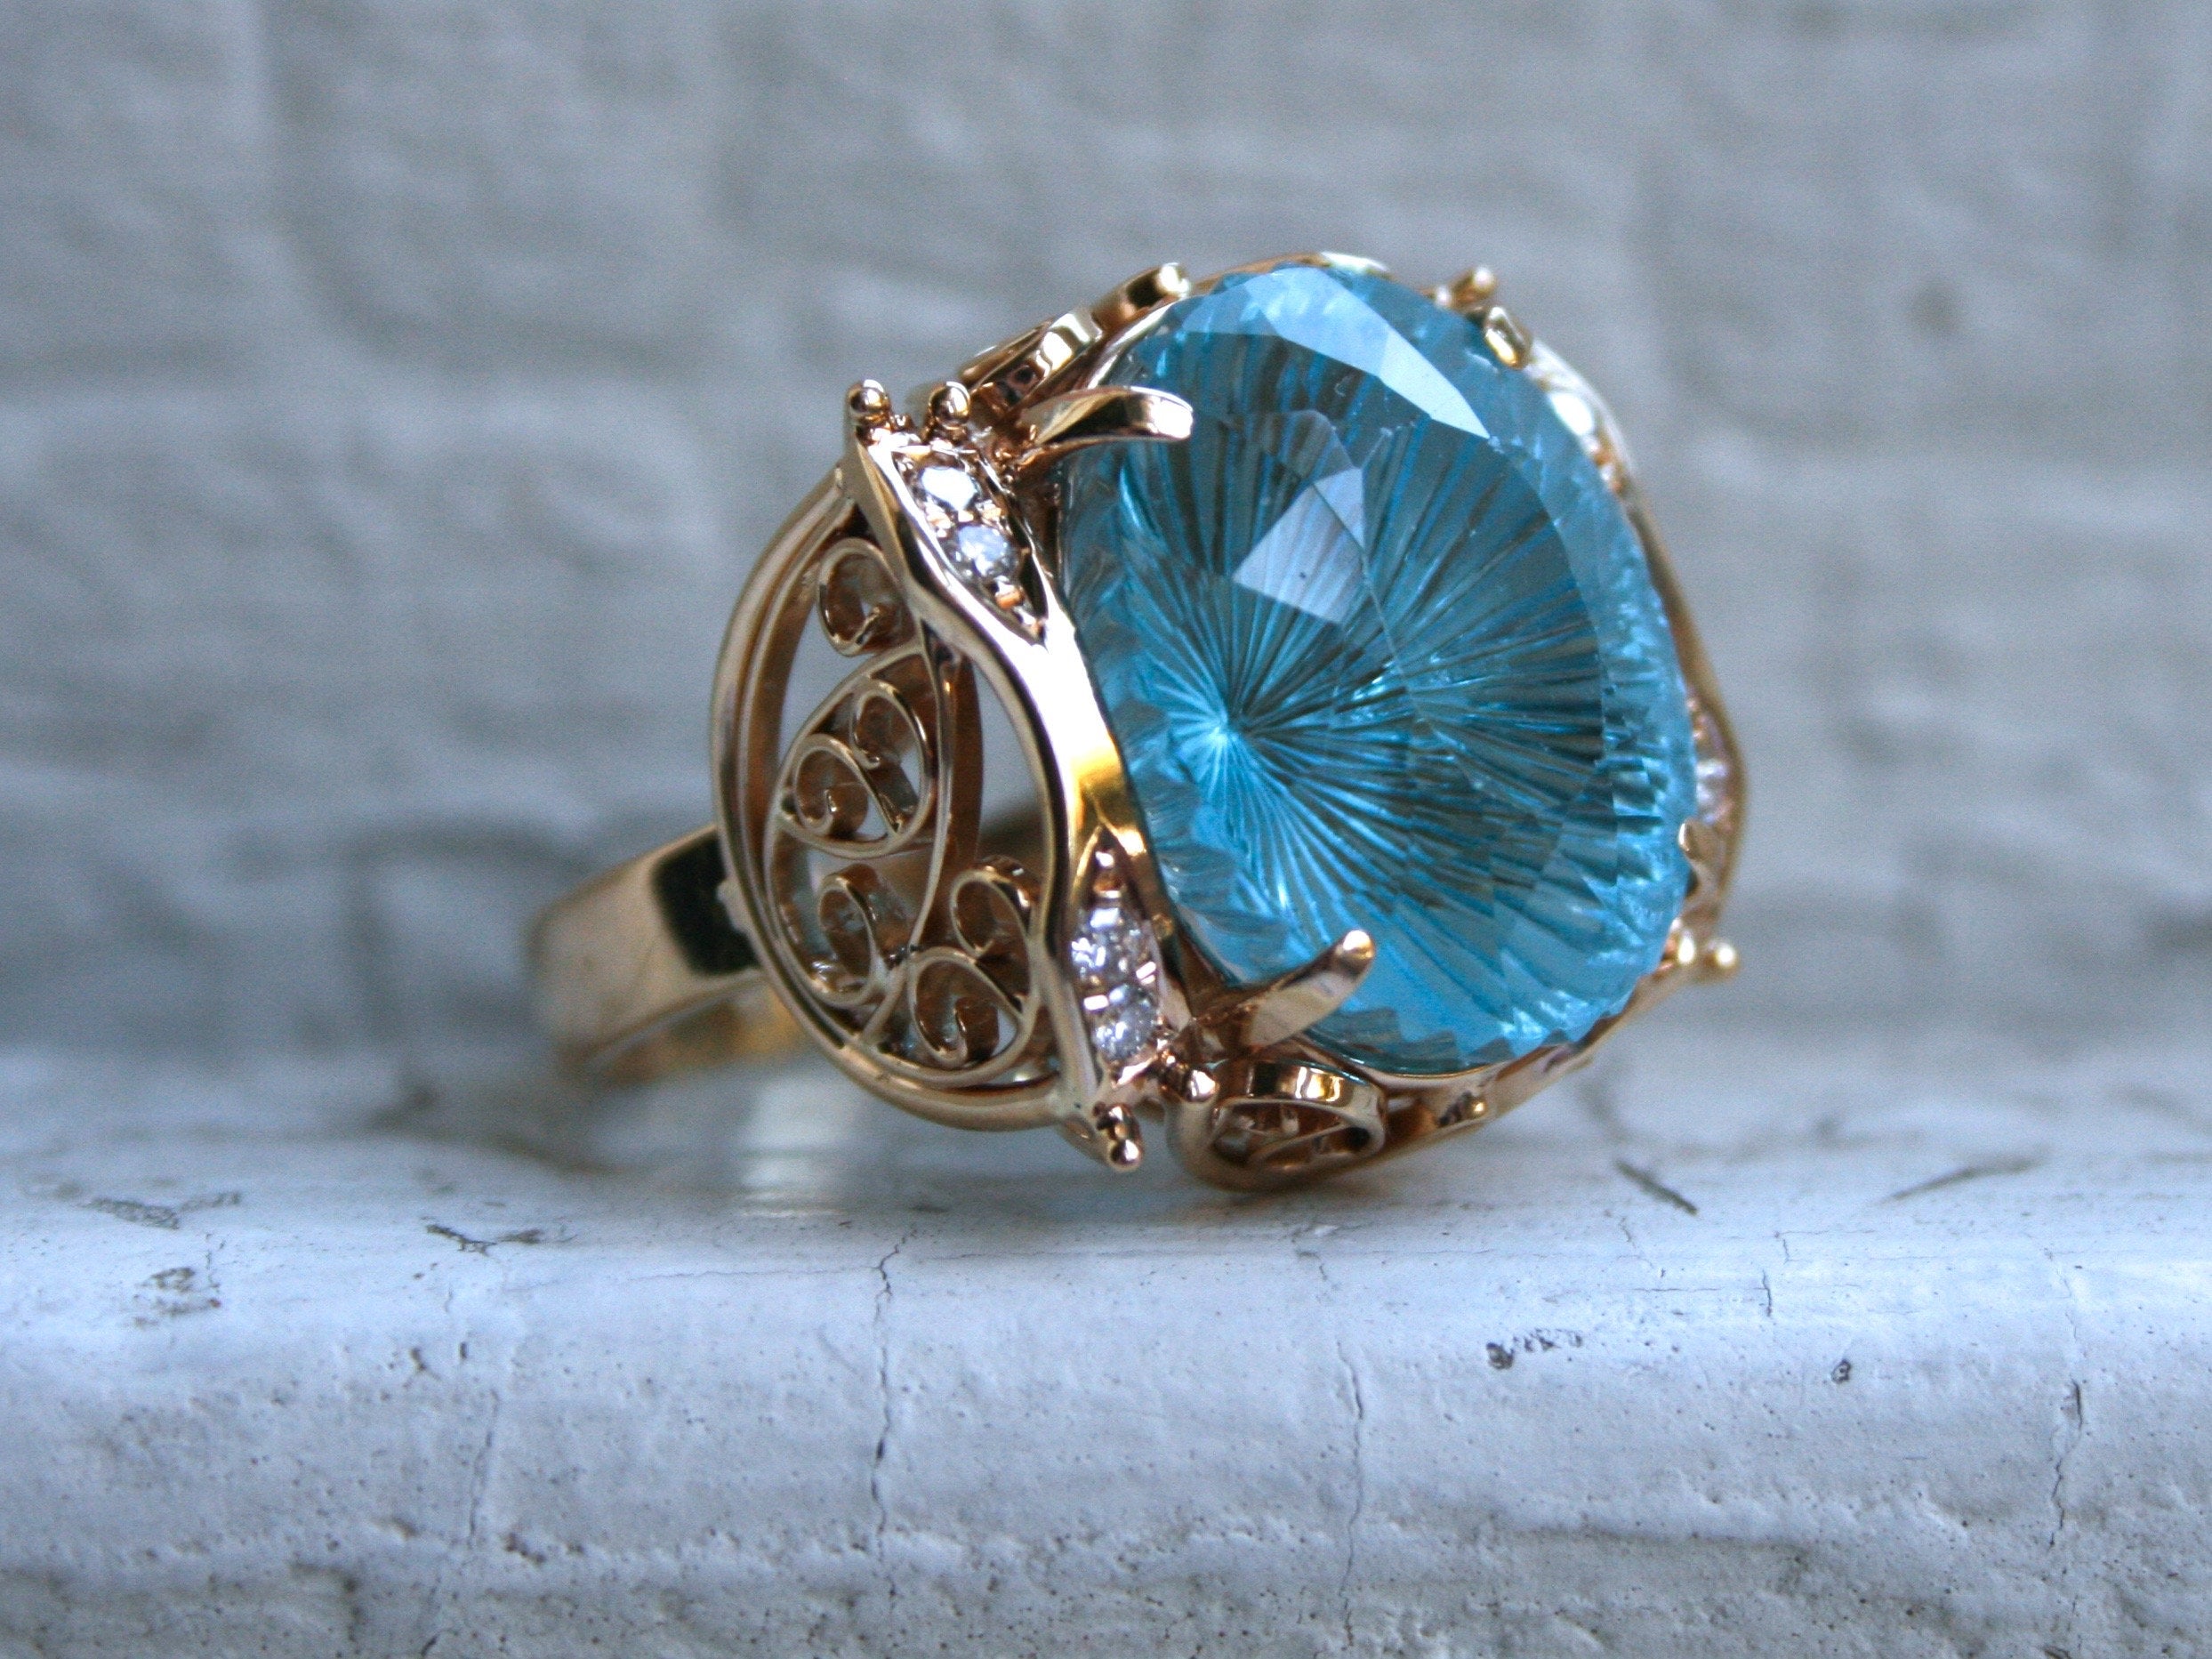 Vintage 18K Yellow Gold Fantasy Cut Blue Topaz and Diamond Ring - 22.71ct.